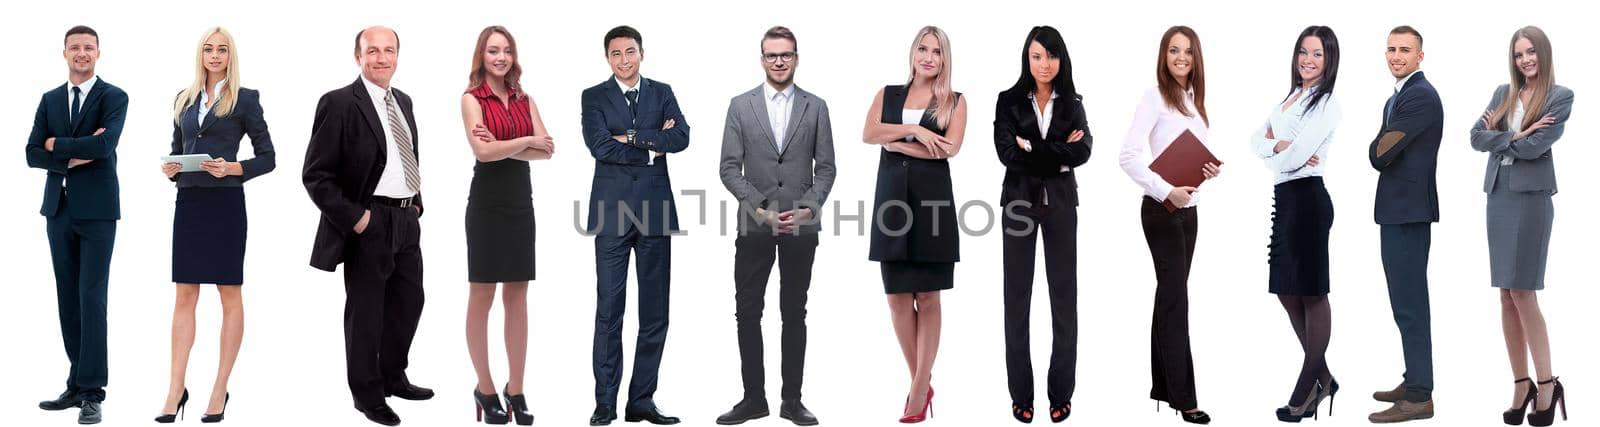 group of successful business people isolated on white background